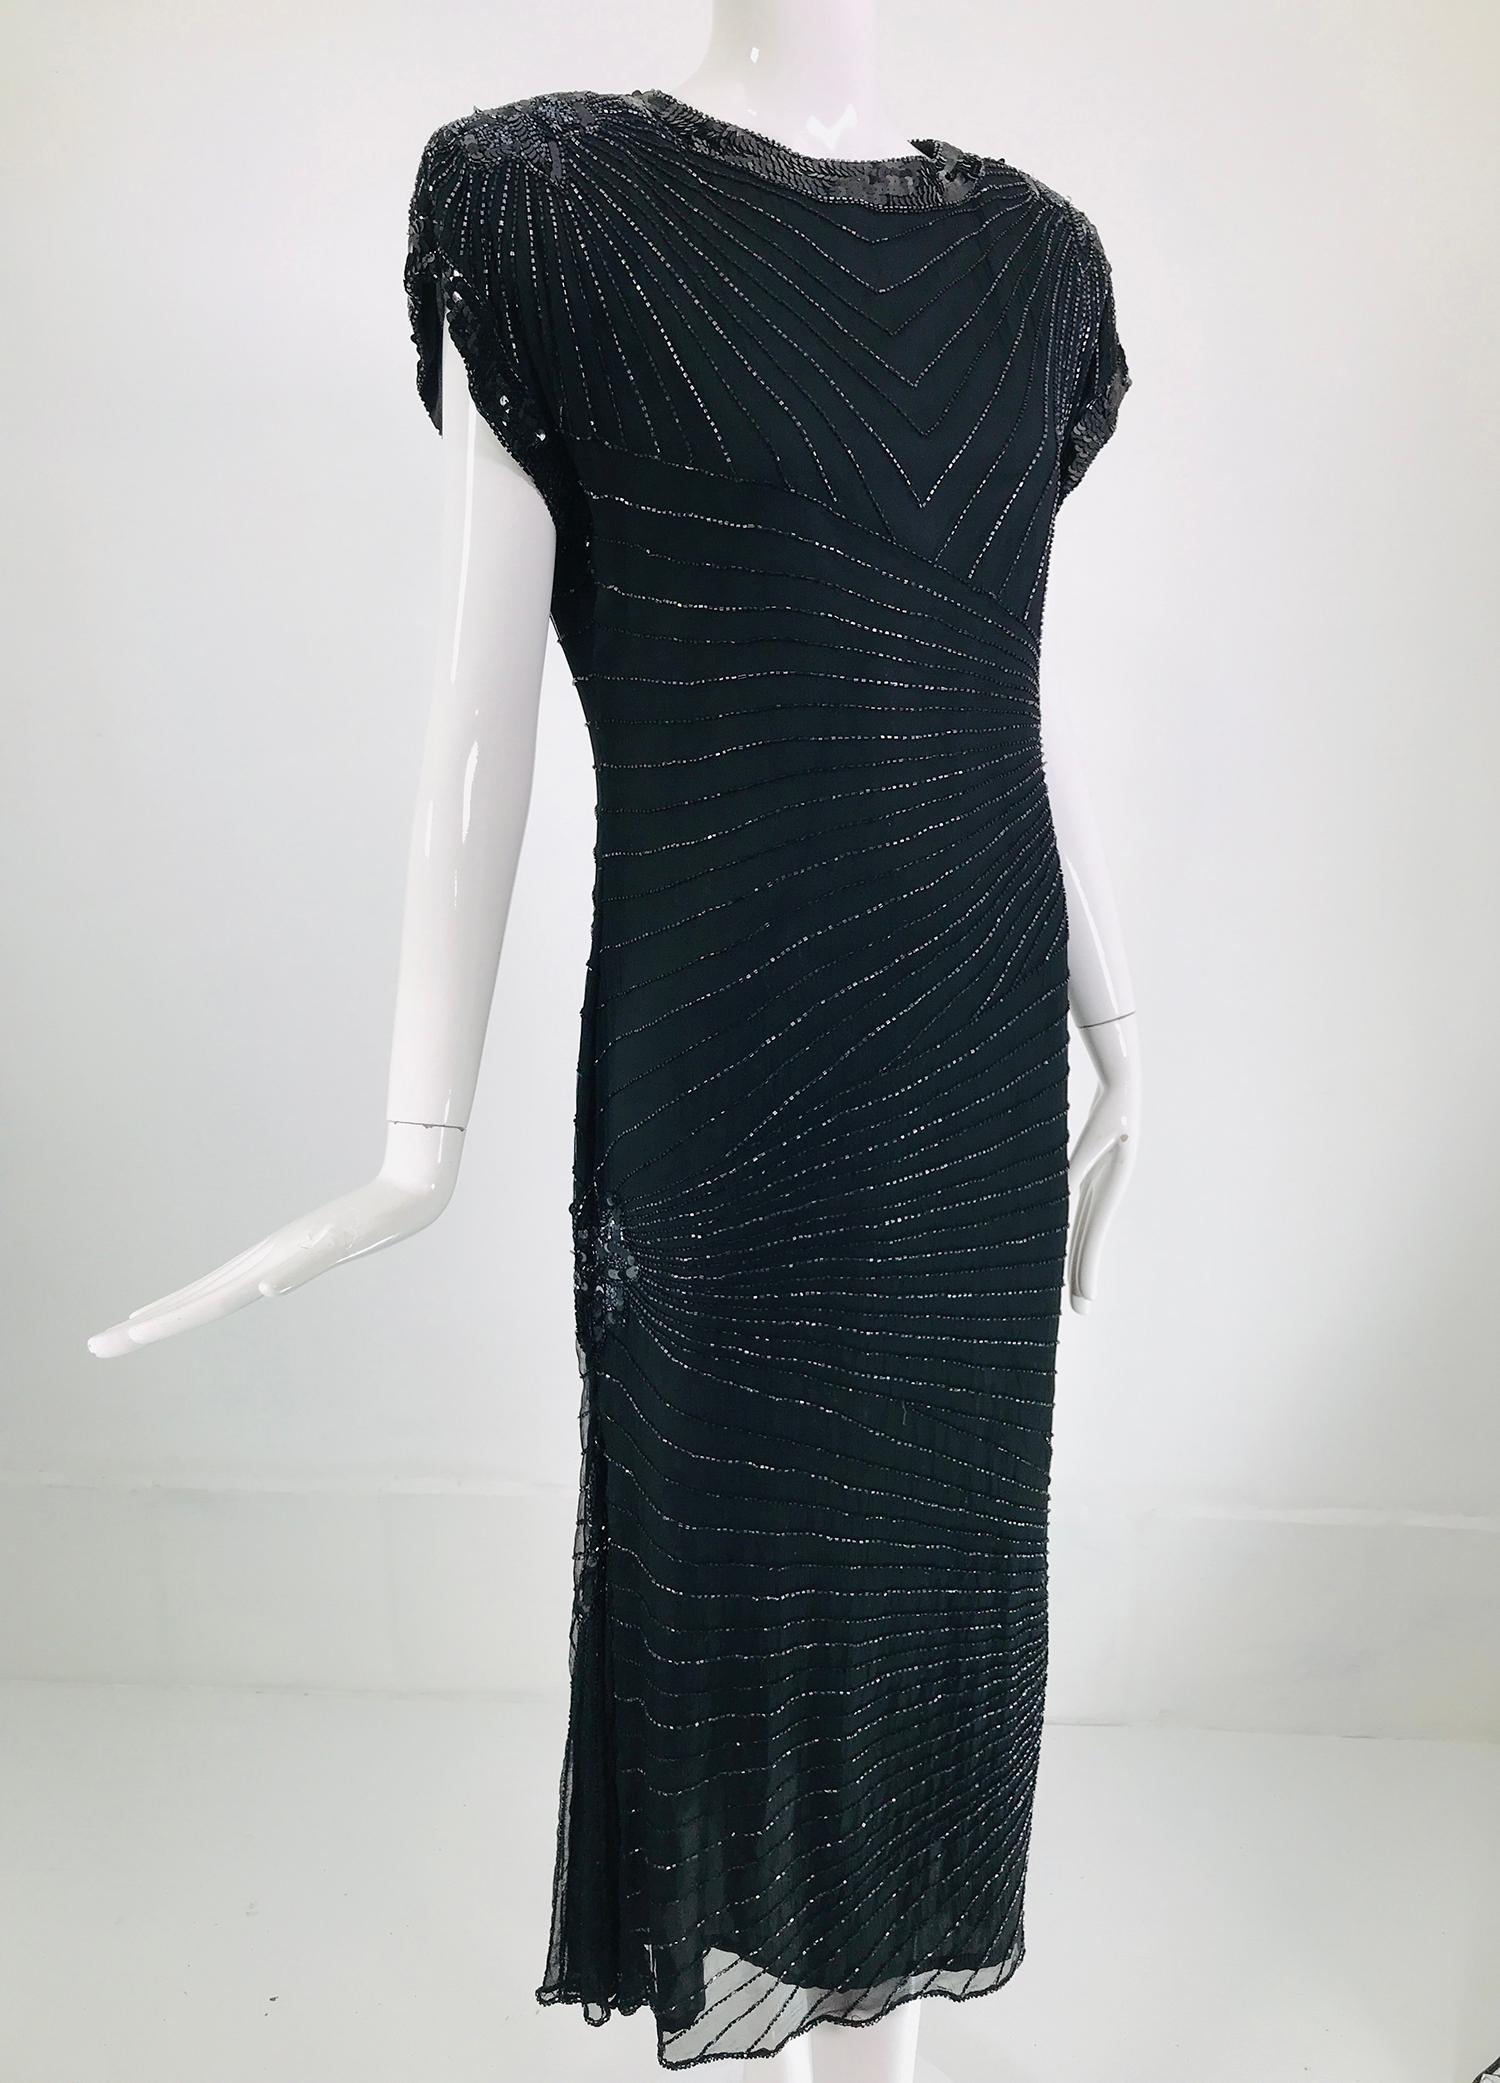 Laurence Kazar black silk beaded & sequin circle back cocktail dress from the 1980s. Cap sleeve dress is fitted through the body and flares at the hem sides & center back with a dip at the hem back. Geometric, art deco beaded design throughout. The